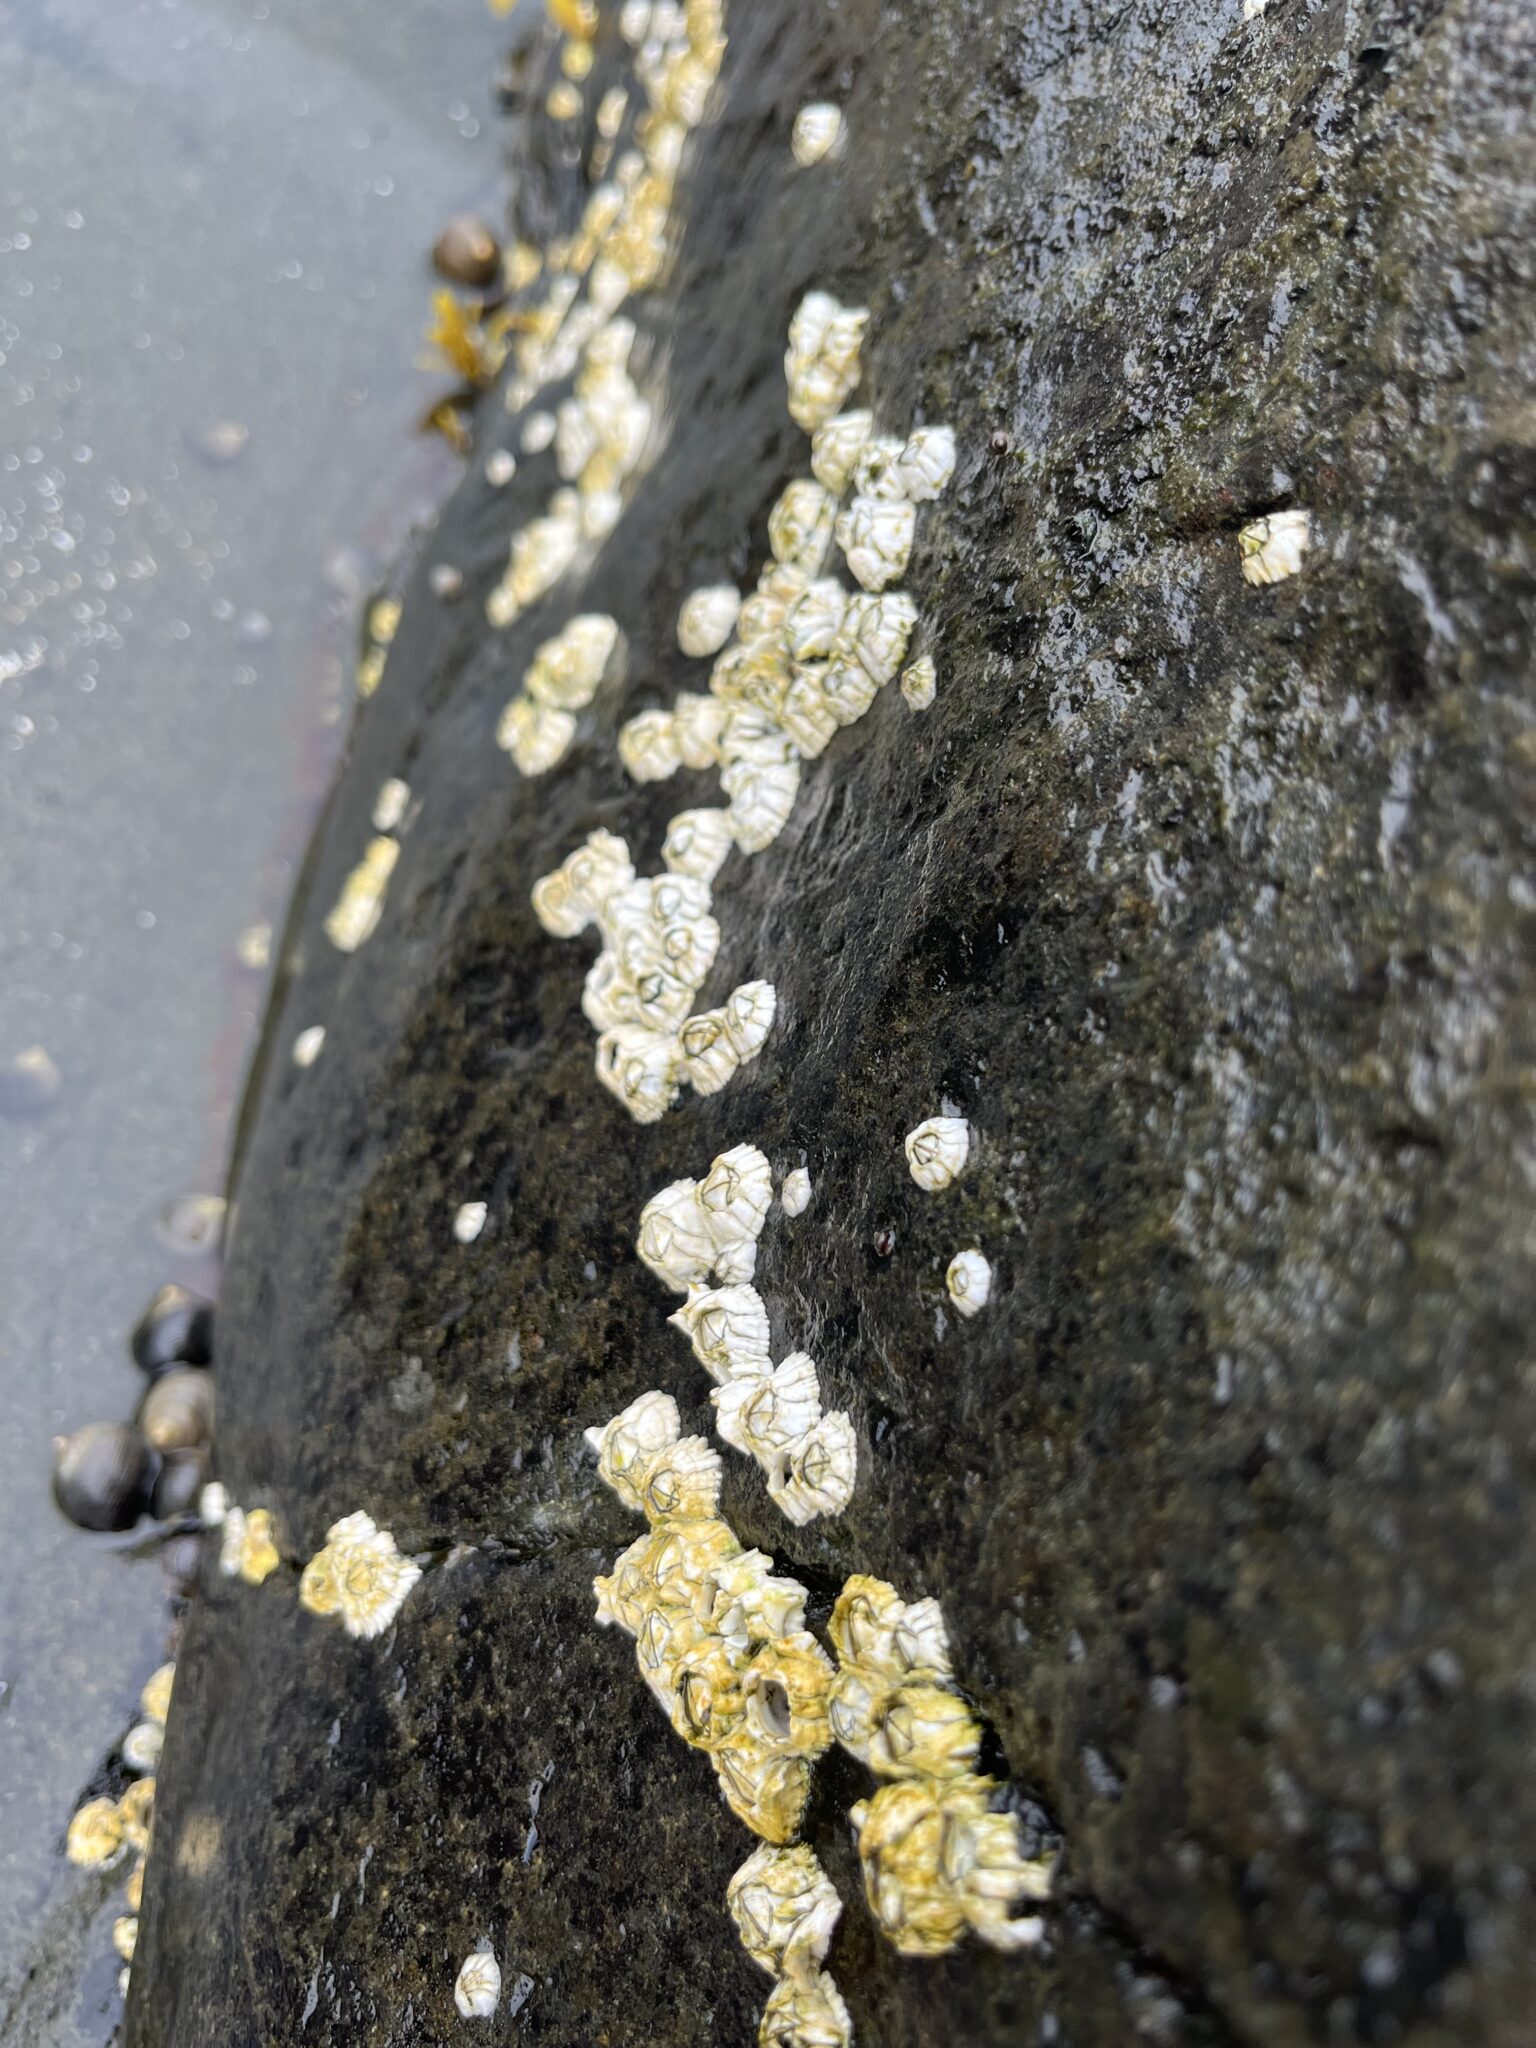 Barnacles clinging to a rock.